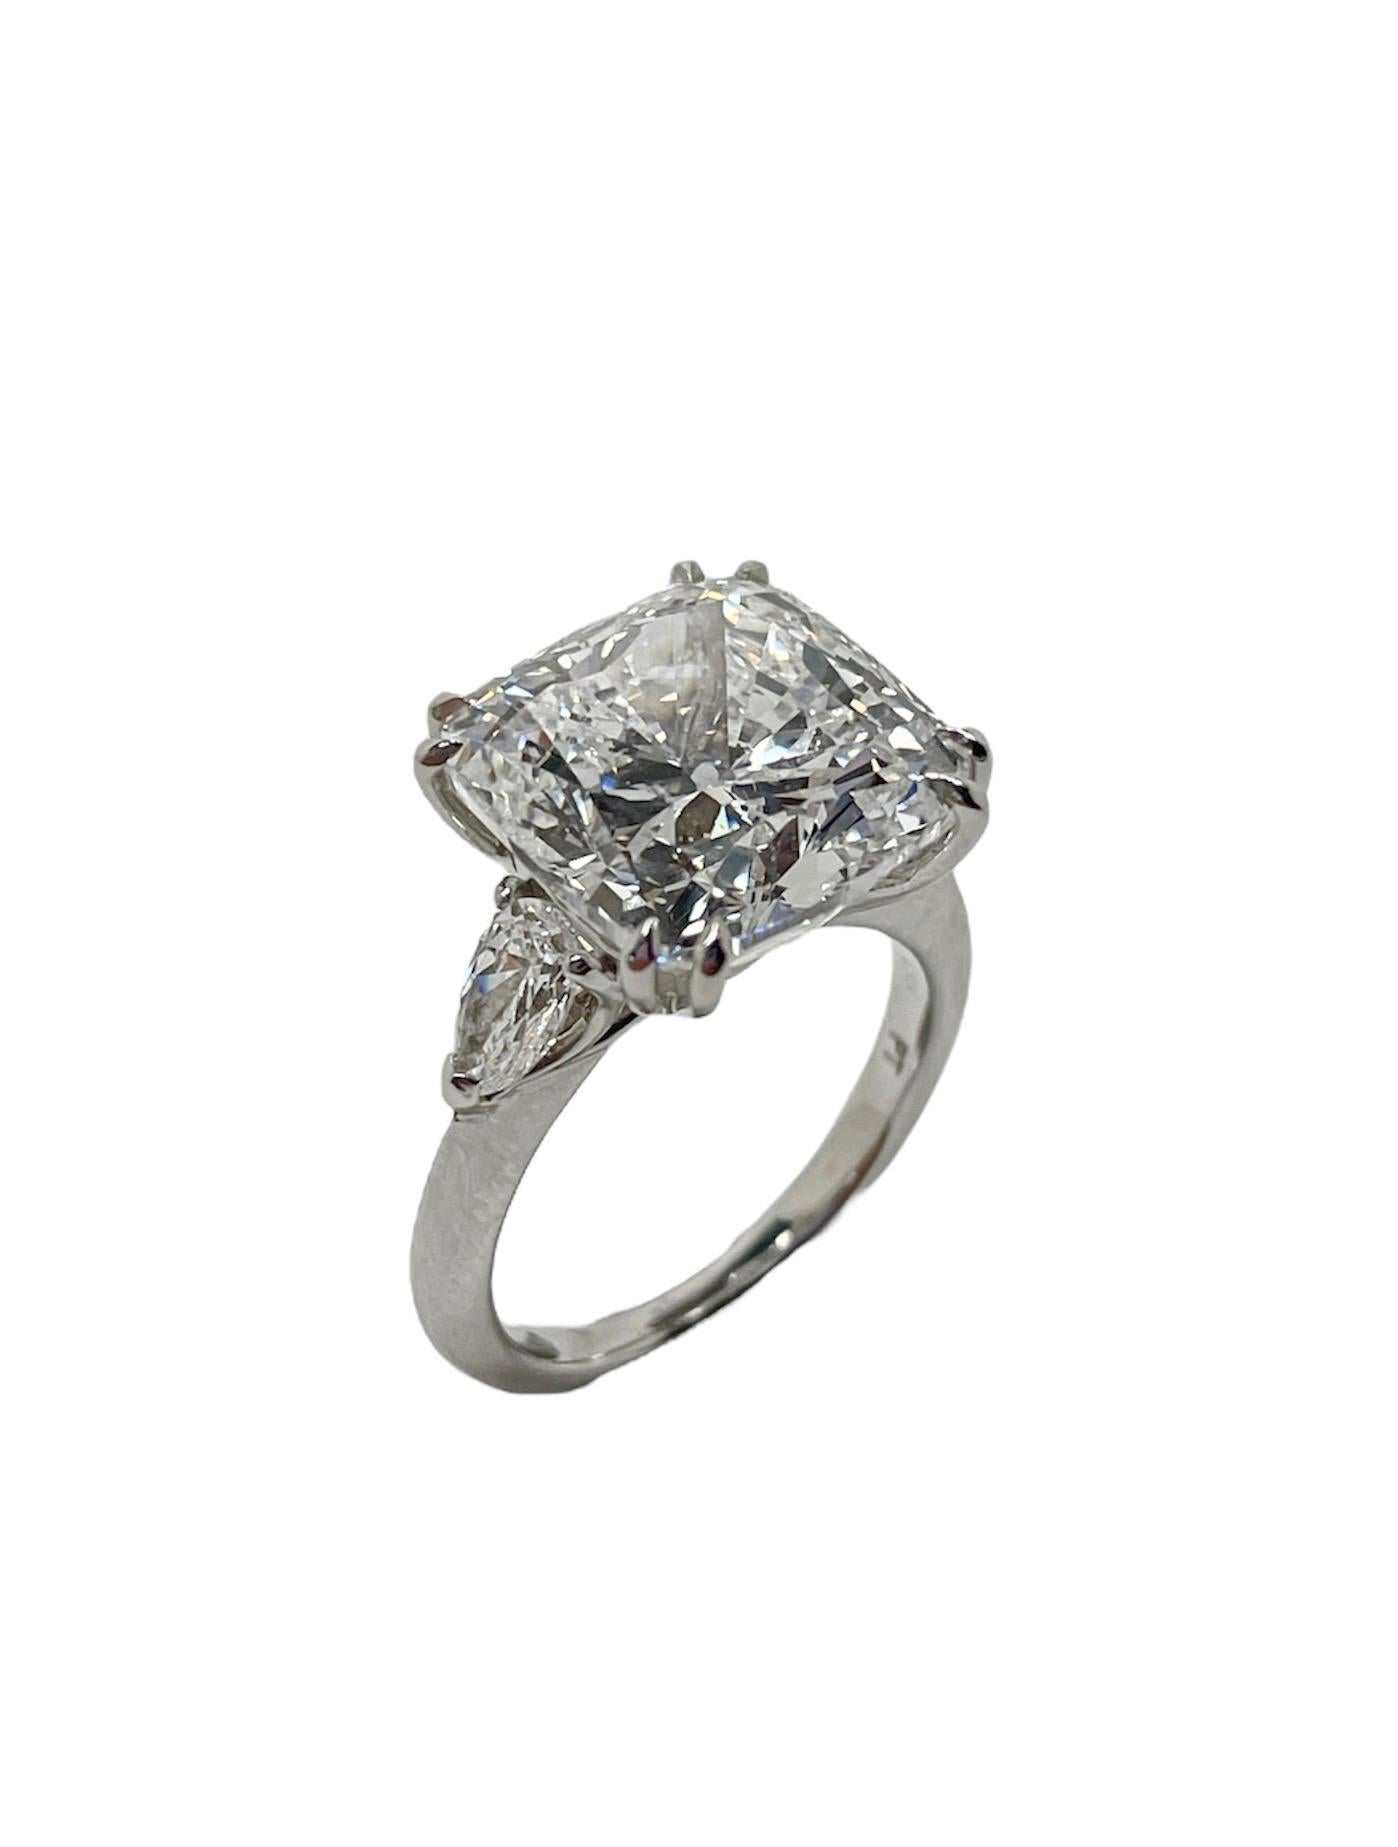 9.27 Carat Cushion Cut Diamond Engagement Ring In Excellent Condition For Sale In Chicago, IL